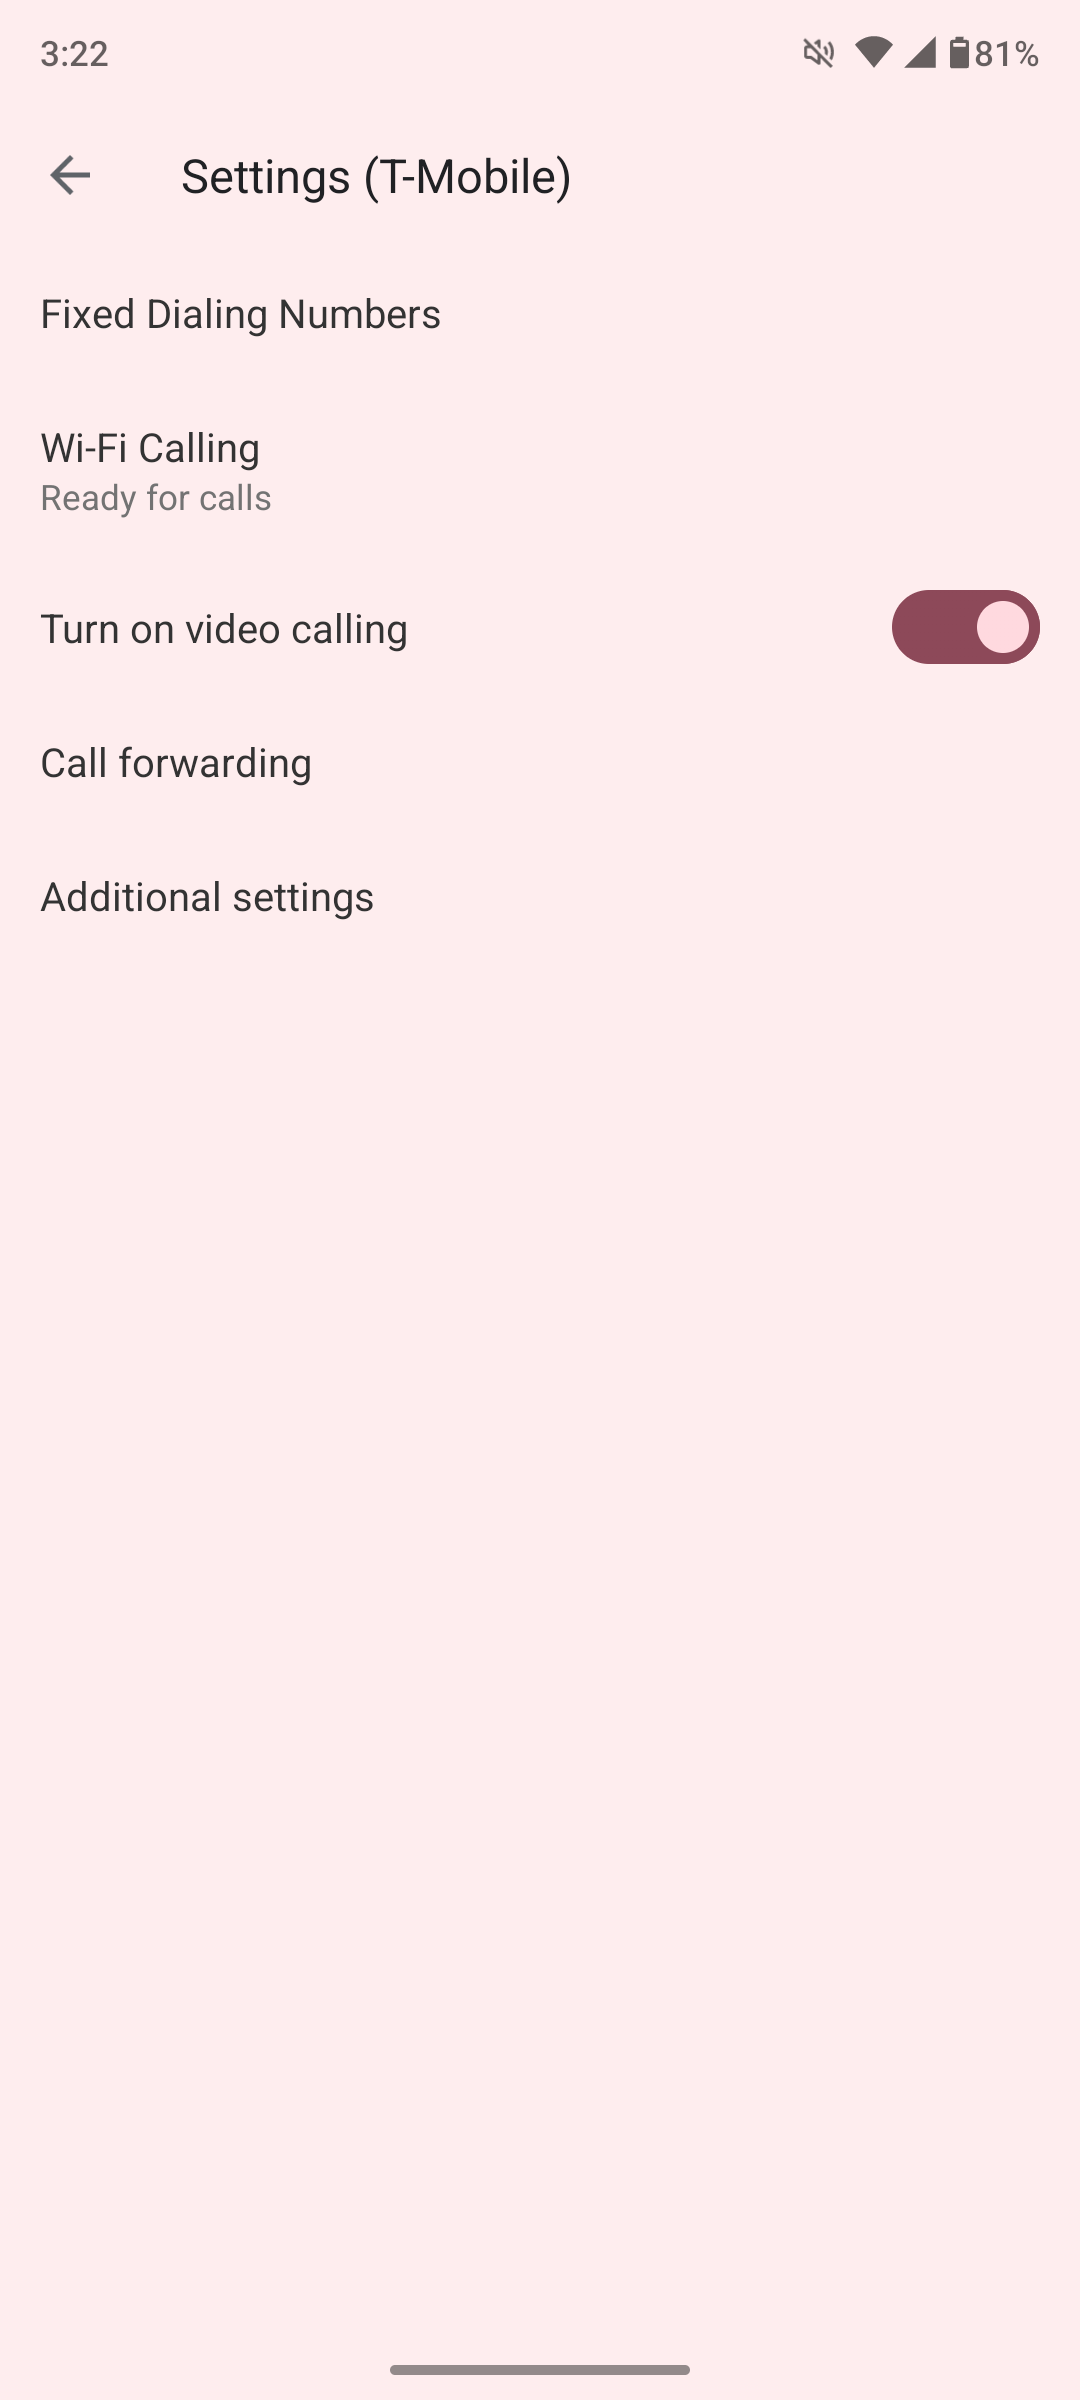 Using the Phone app on an Android phone to make your number private for all phone calls.